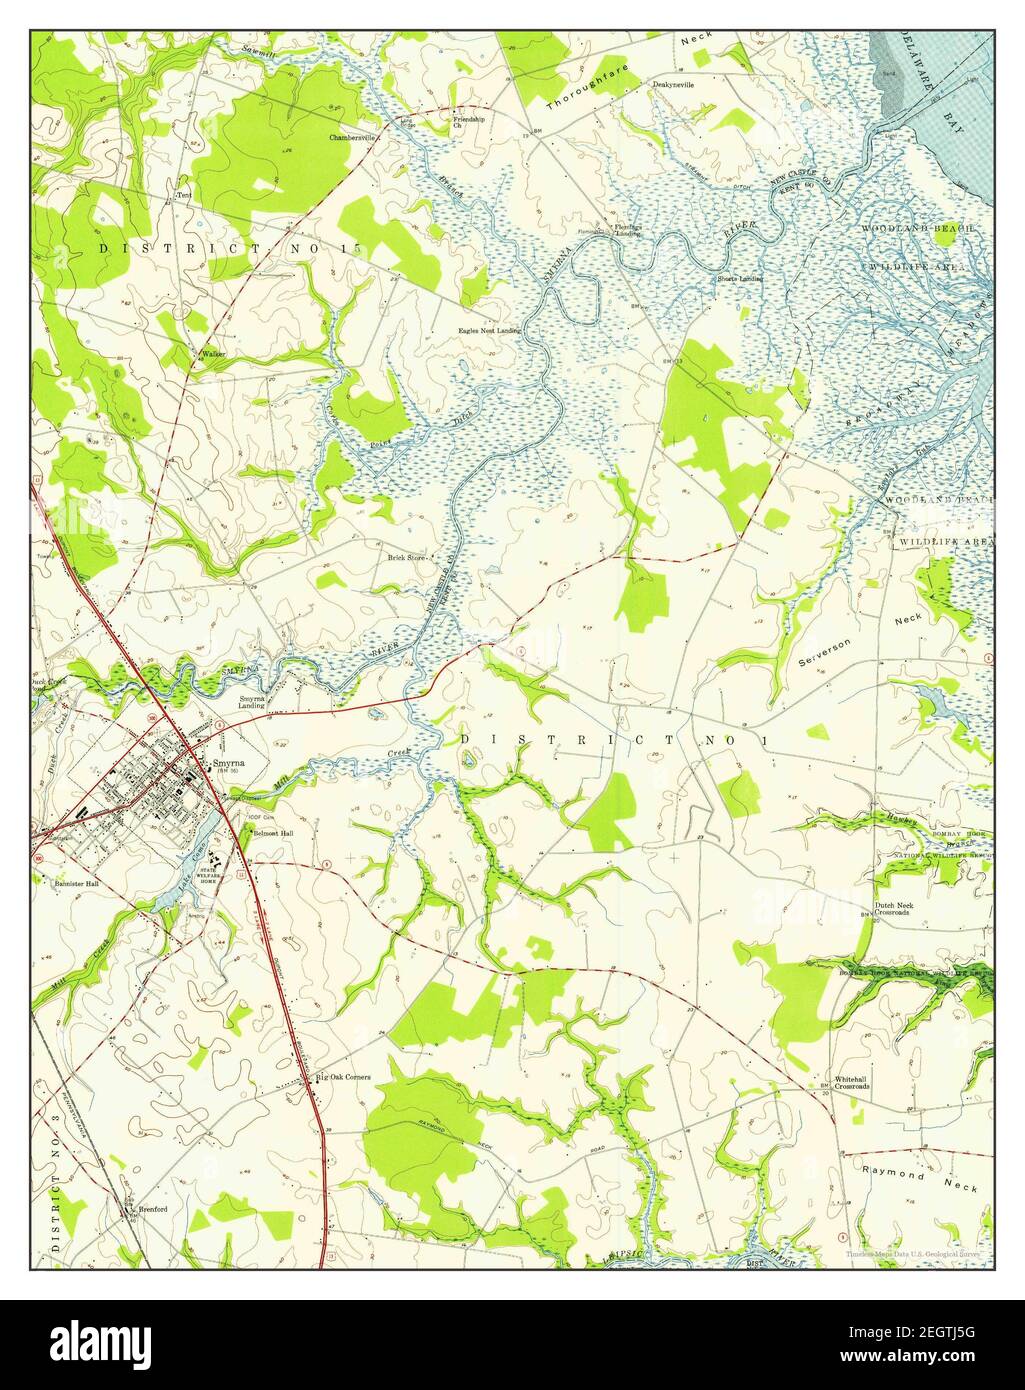 Smyrna, Delaware, map 1956, 1:24000, United States of America by Timeless Maps, data U.S. Geological Survey Foto Stock